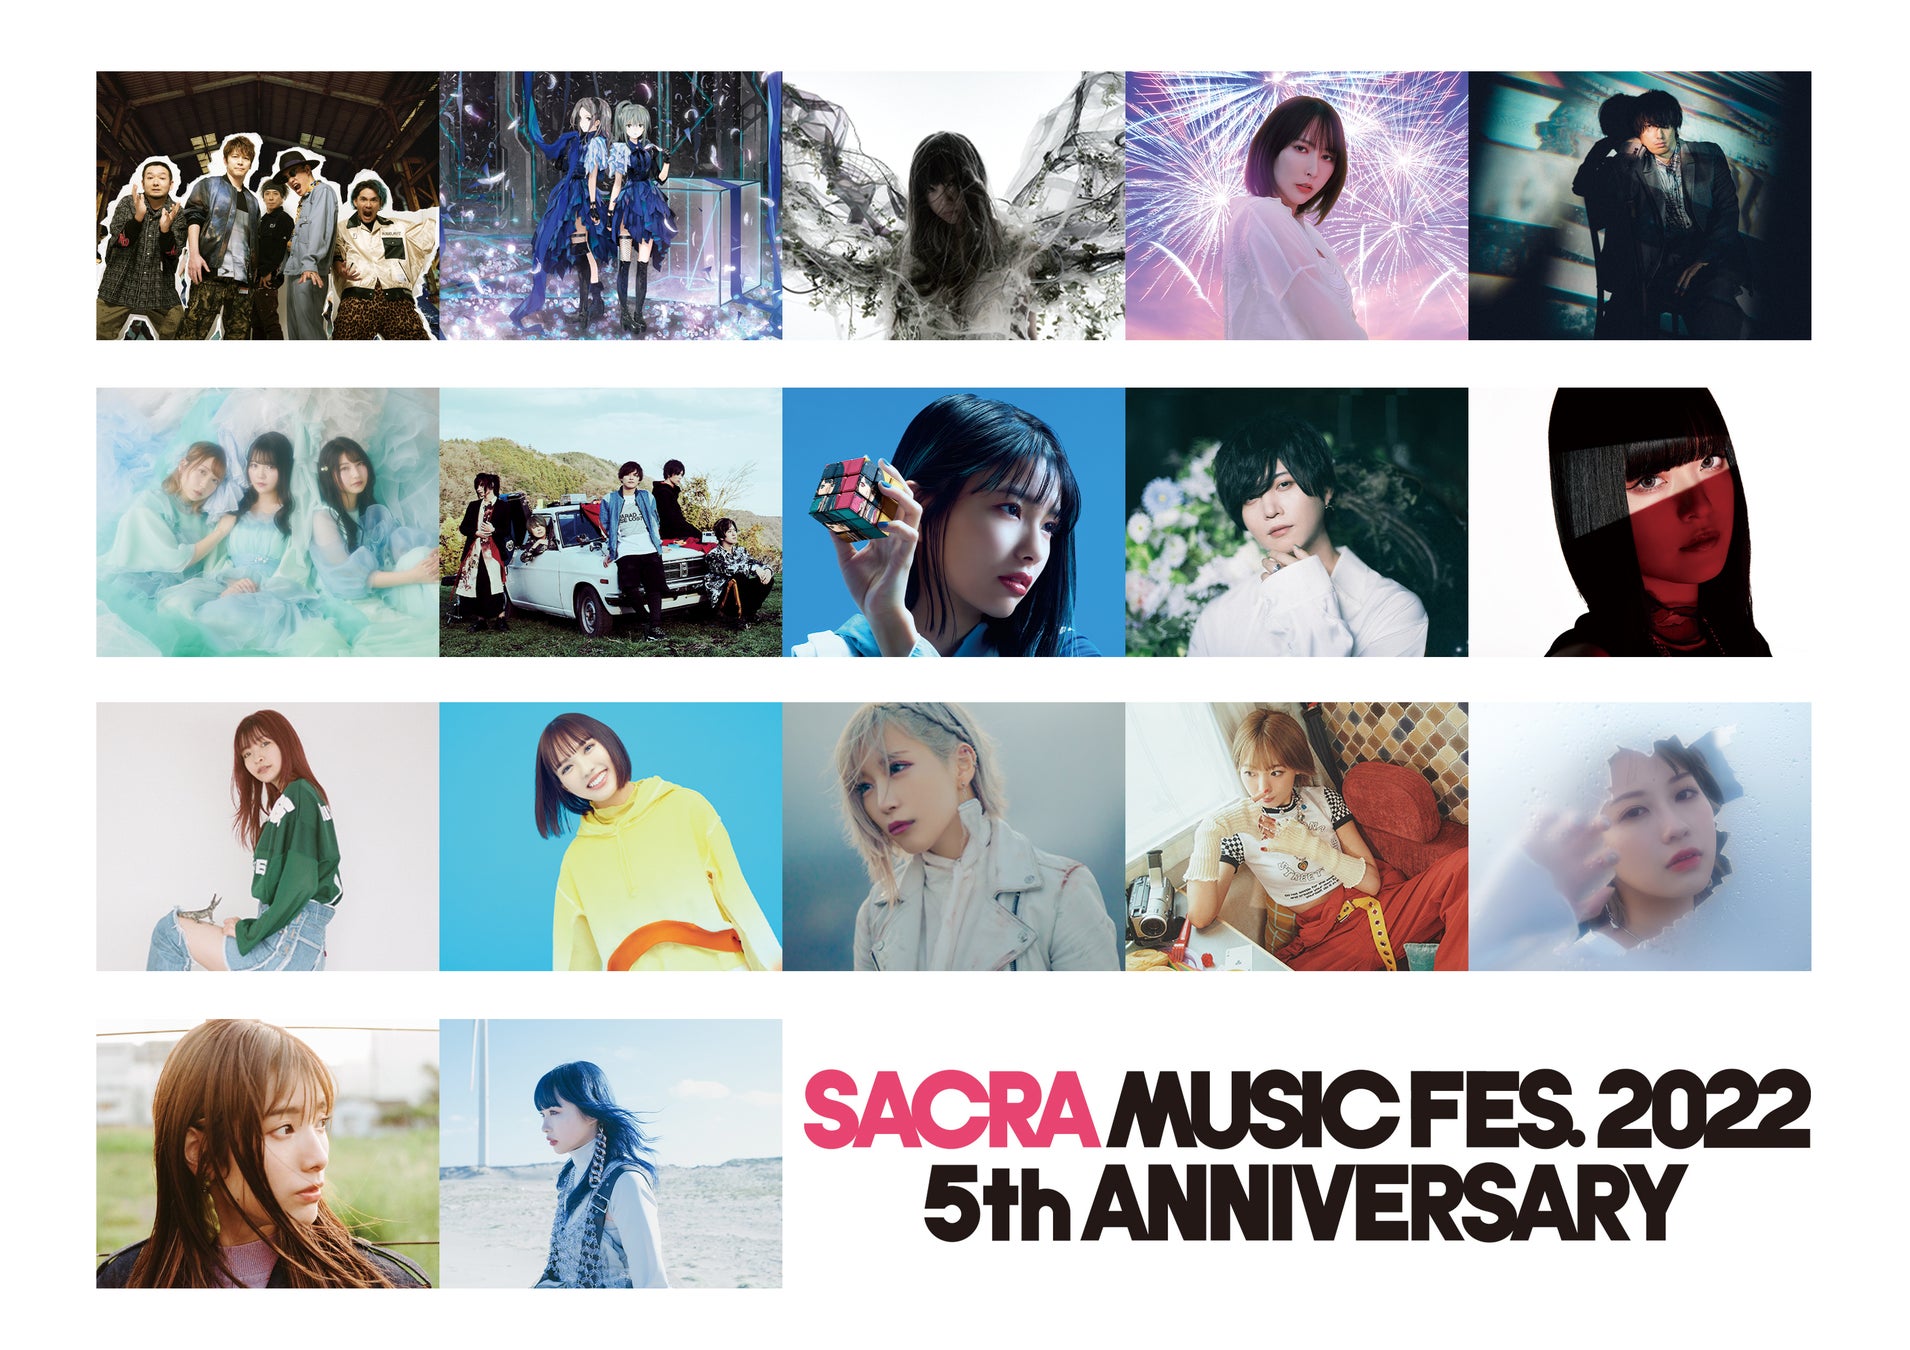 SACRA MUSIC FES. 2022 -5th Anniversary-会場限定 グッズ＆CD購入者抽選会が、WithLIVEを利用して開催！のサブ画像1